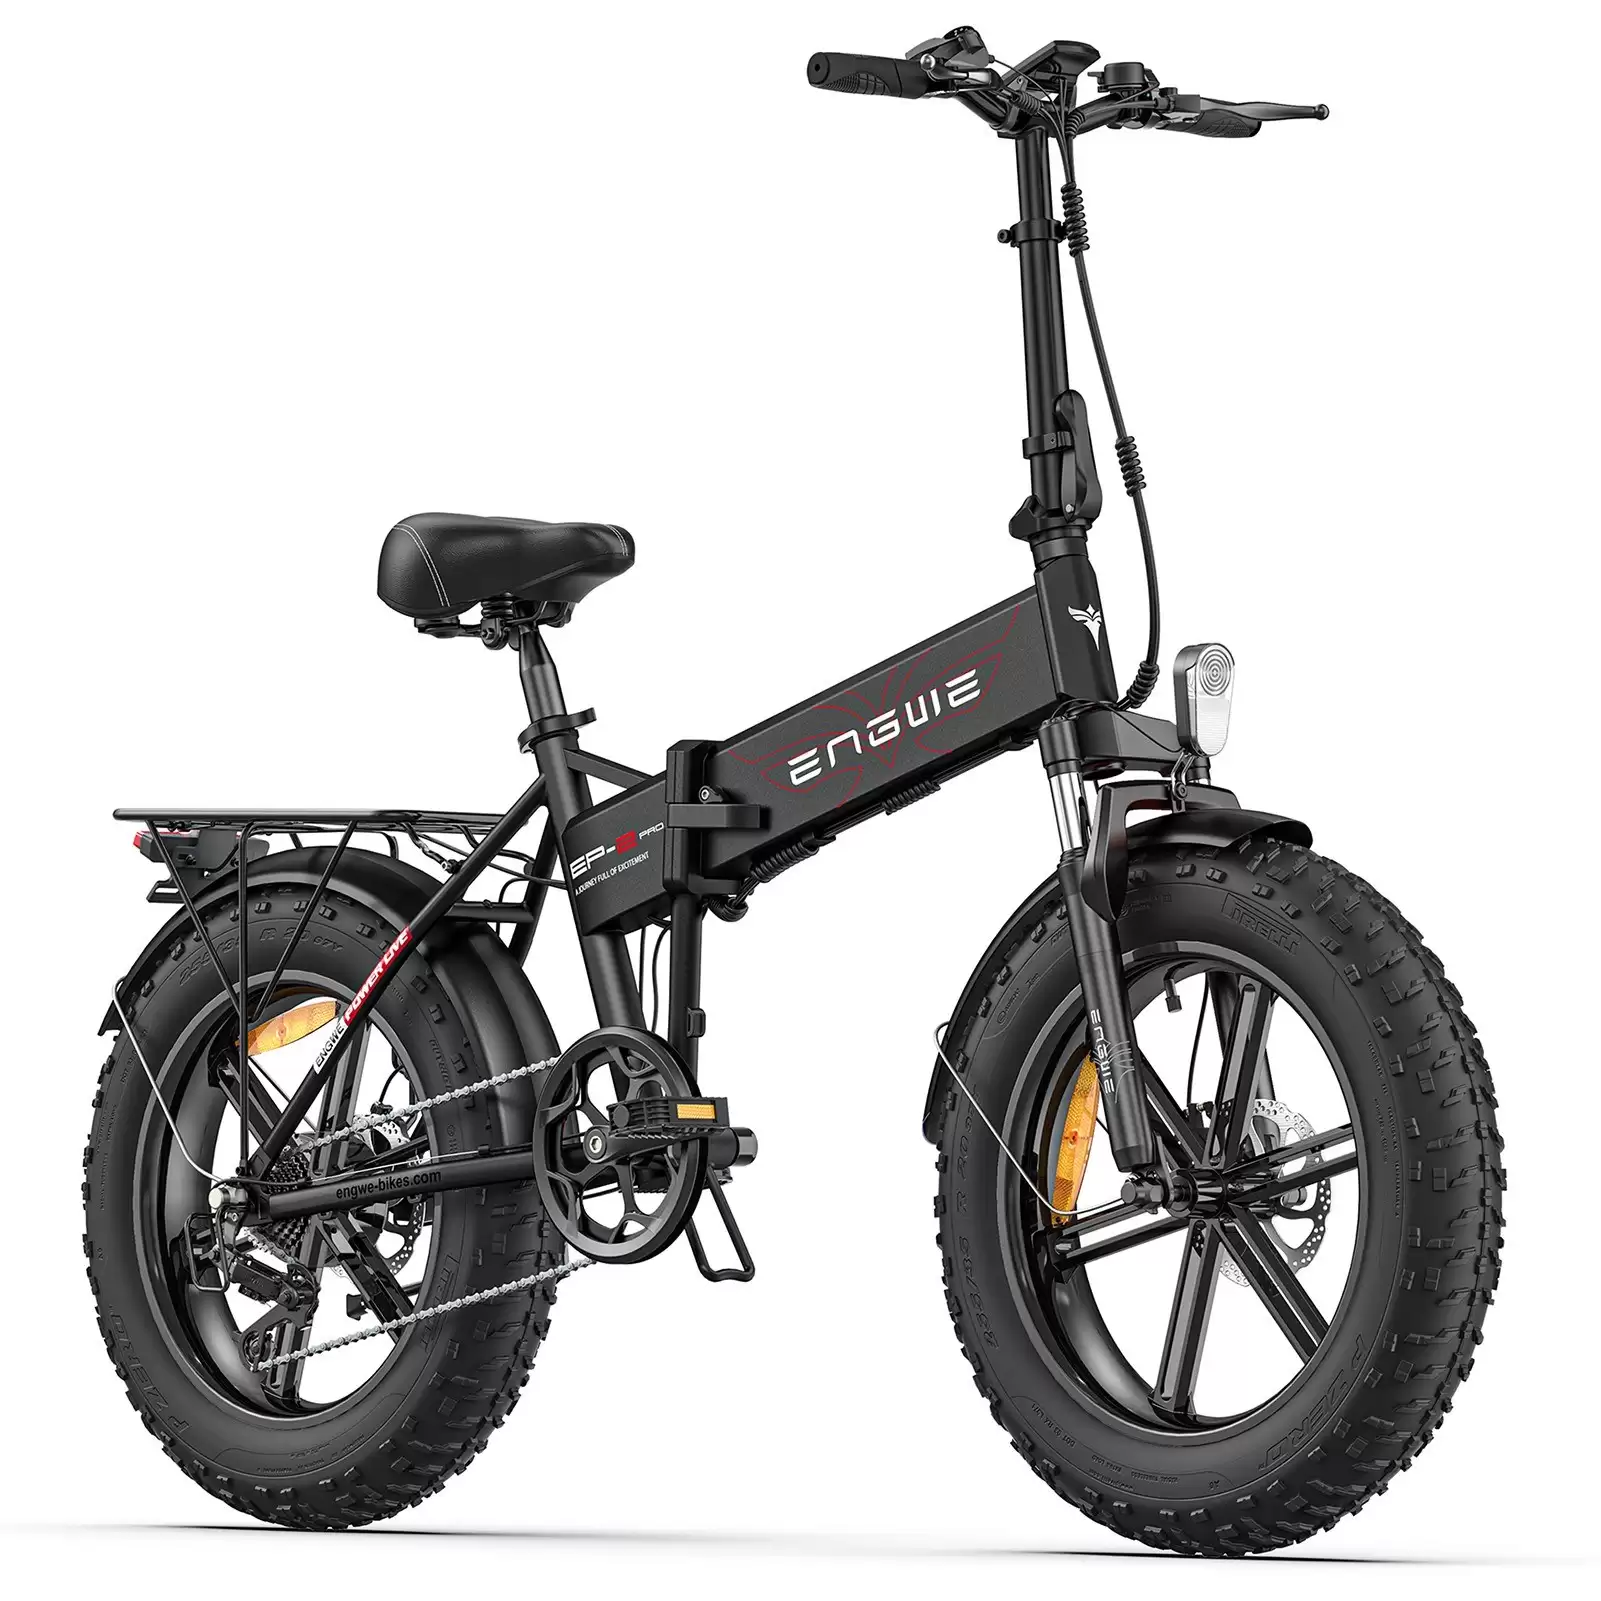 Pay Only $899.99 For Engwe Ep-2 Pro Folding Electric Bike + Free Shipping With This Discount Coupon At Cafago